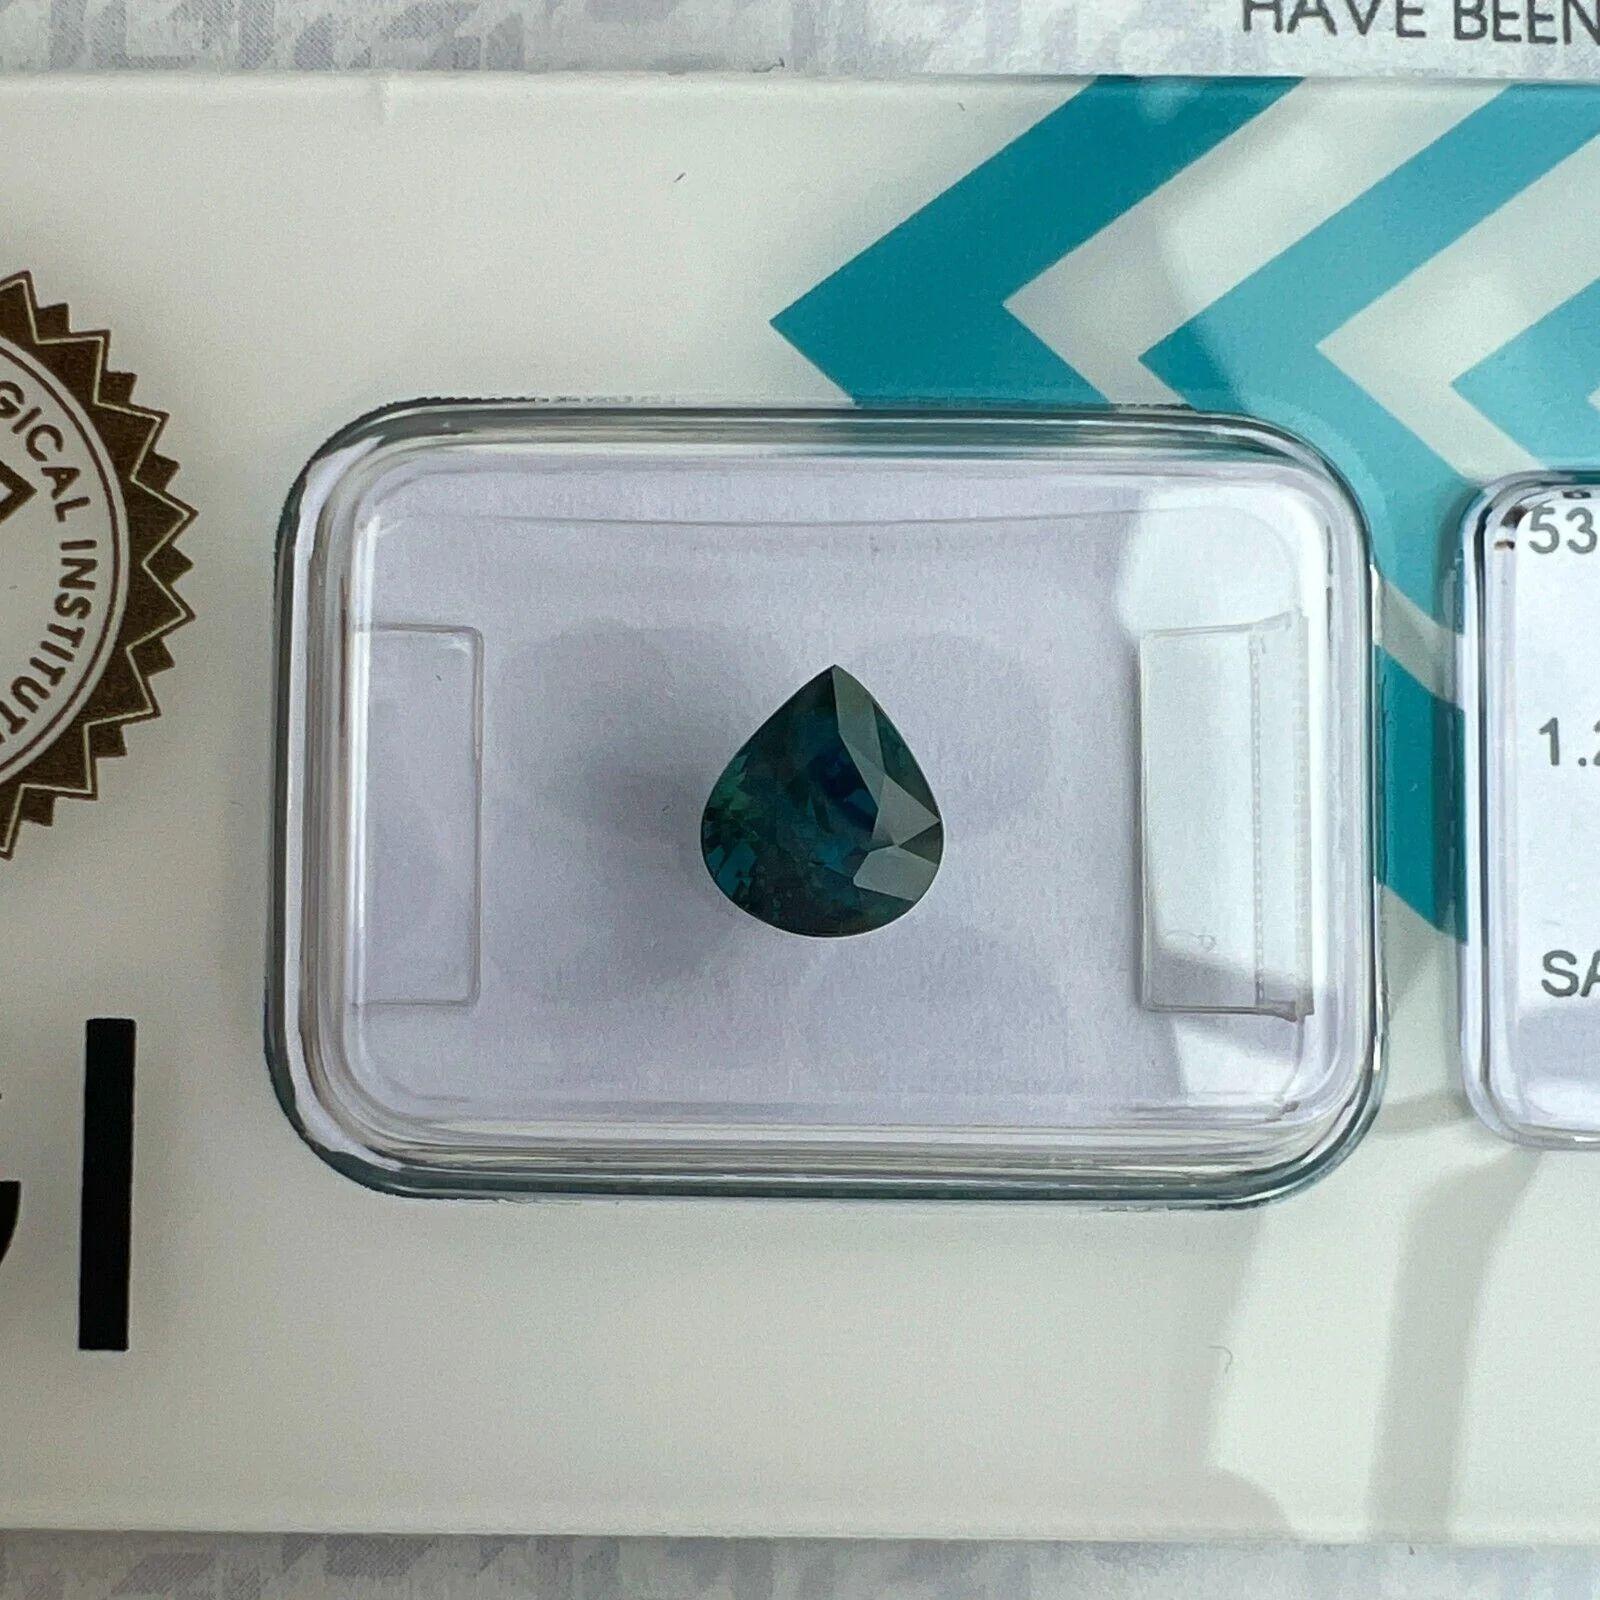 1.24ct Untreated Deep Blue Sapphire IGI Certified Unheated Pear Cut Gem 6.8x6mm

Deep Blue Untreated Sapphire In IGI Blister.
1.24 Carat with an excellent pear cut and totally untreated/unheated which is very rare for natural sapphires. Confirmed as